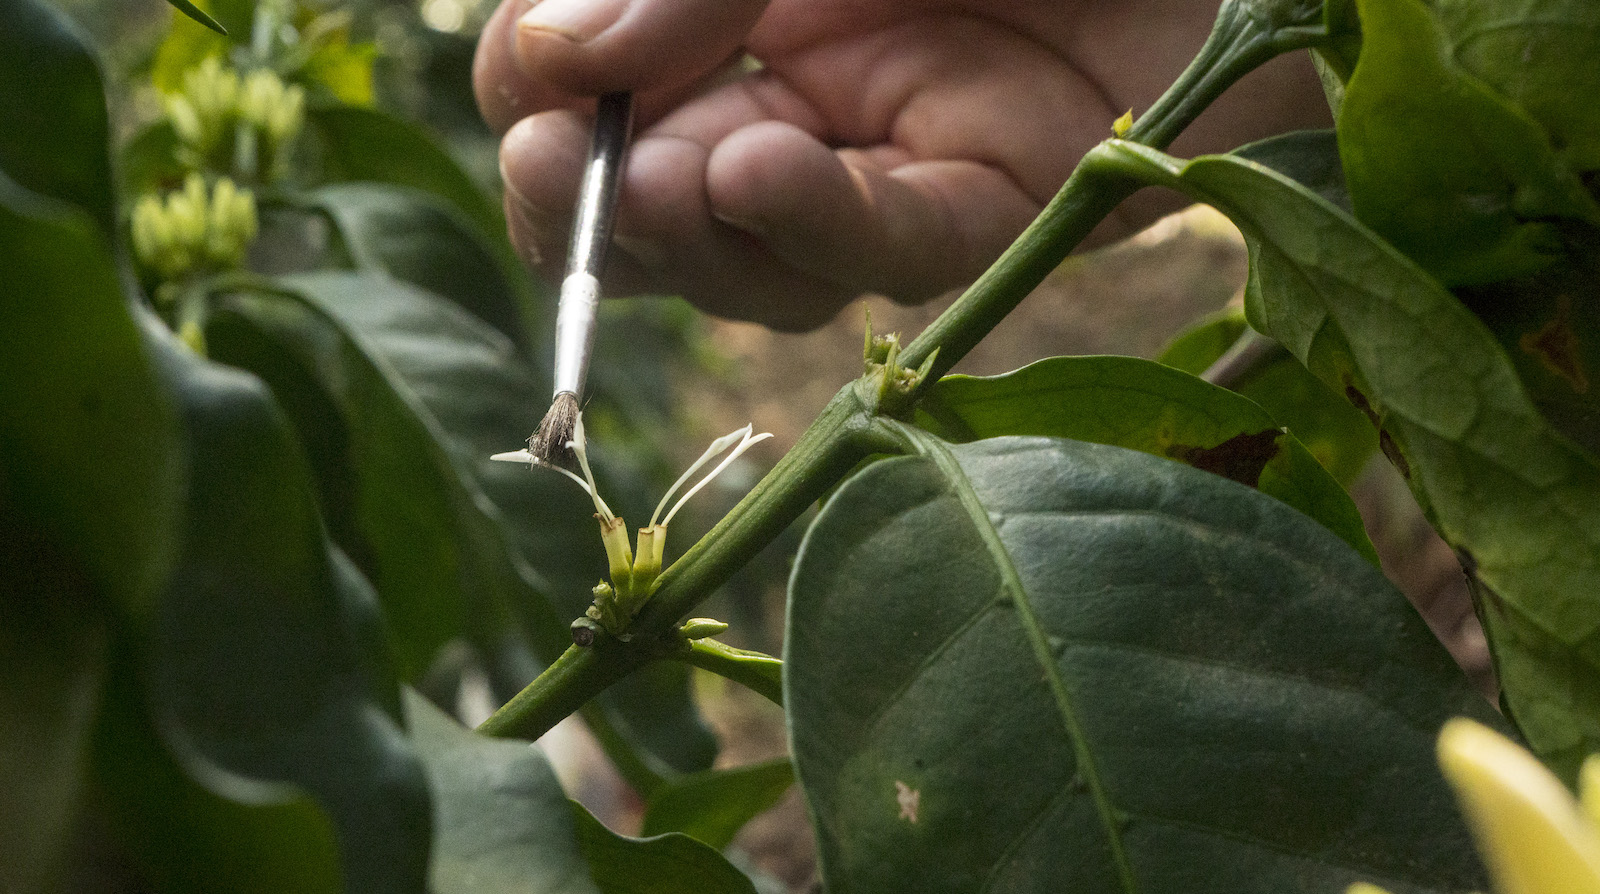 A close-up of a hand brushing a paintbrush against small white protuberances sprouting out of a lush green branch